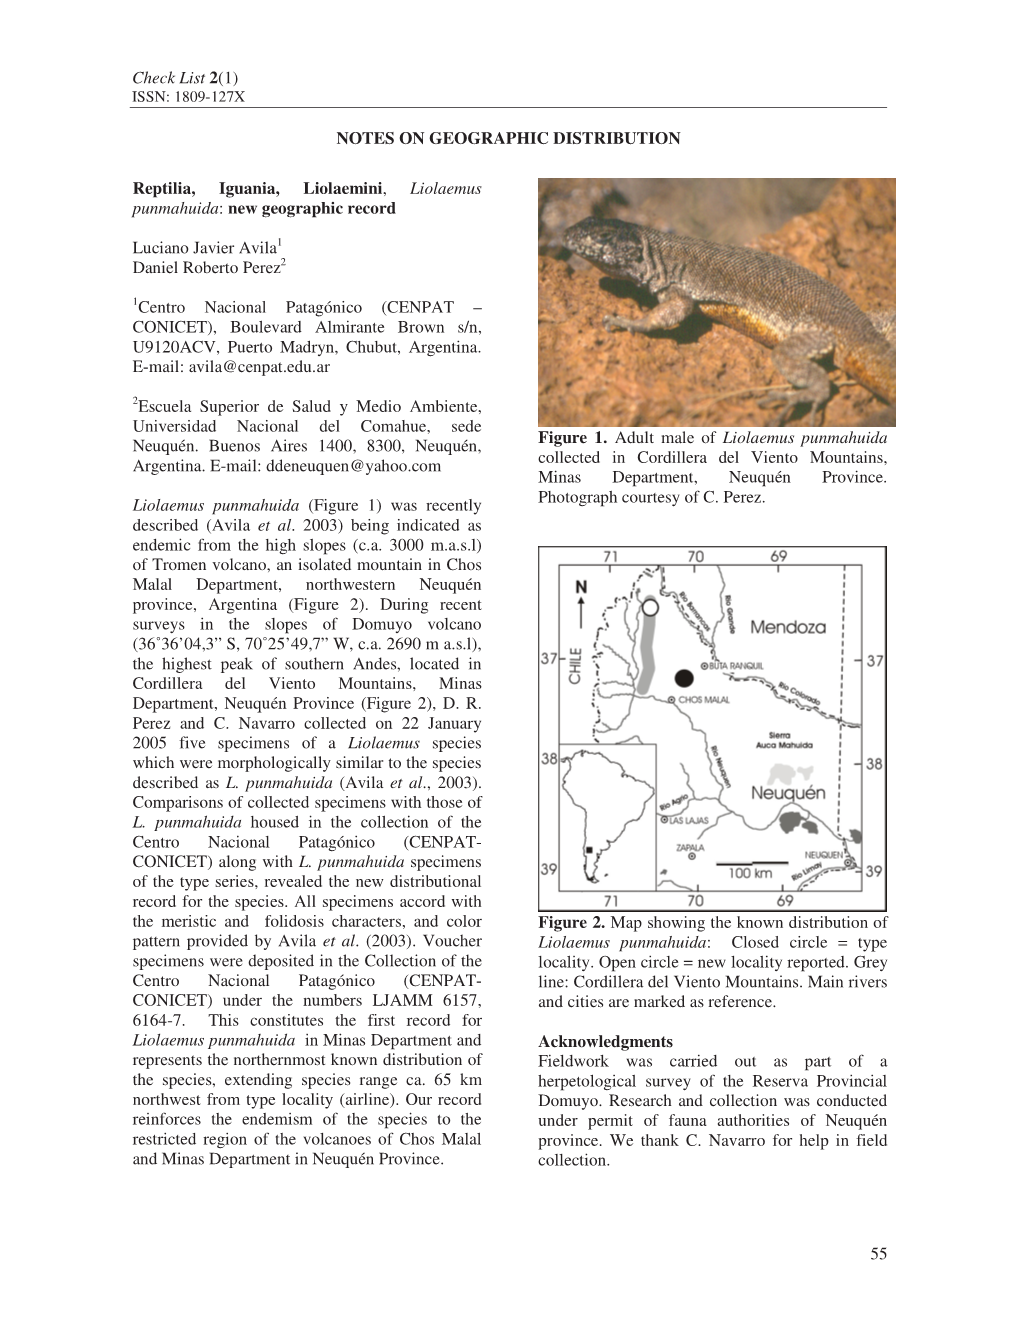 NOTES on GEOGRAPHIC DISTRIBUTION Reptilia, Iguania